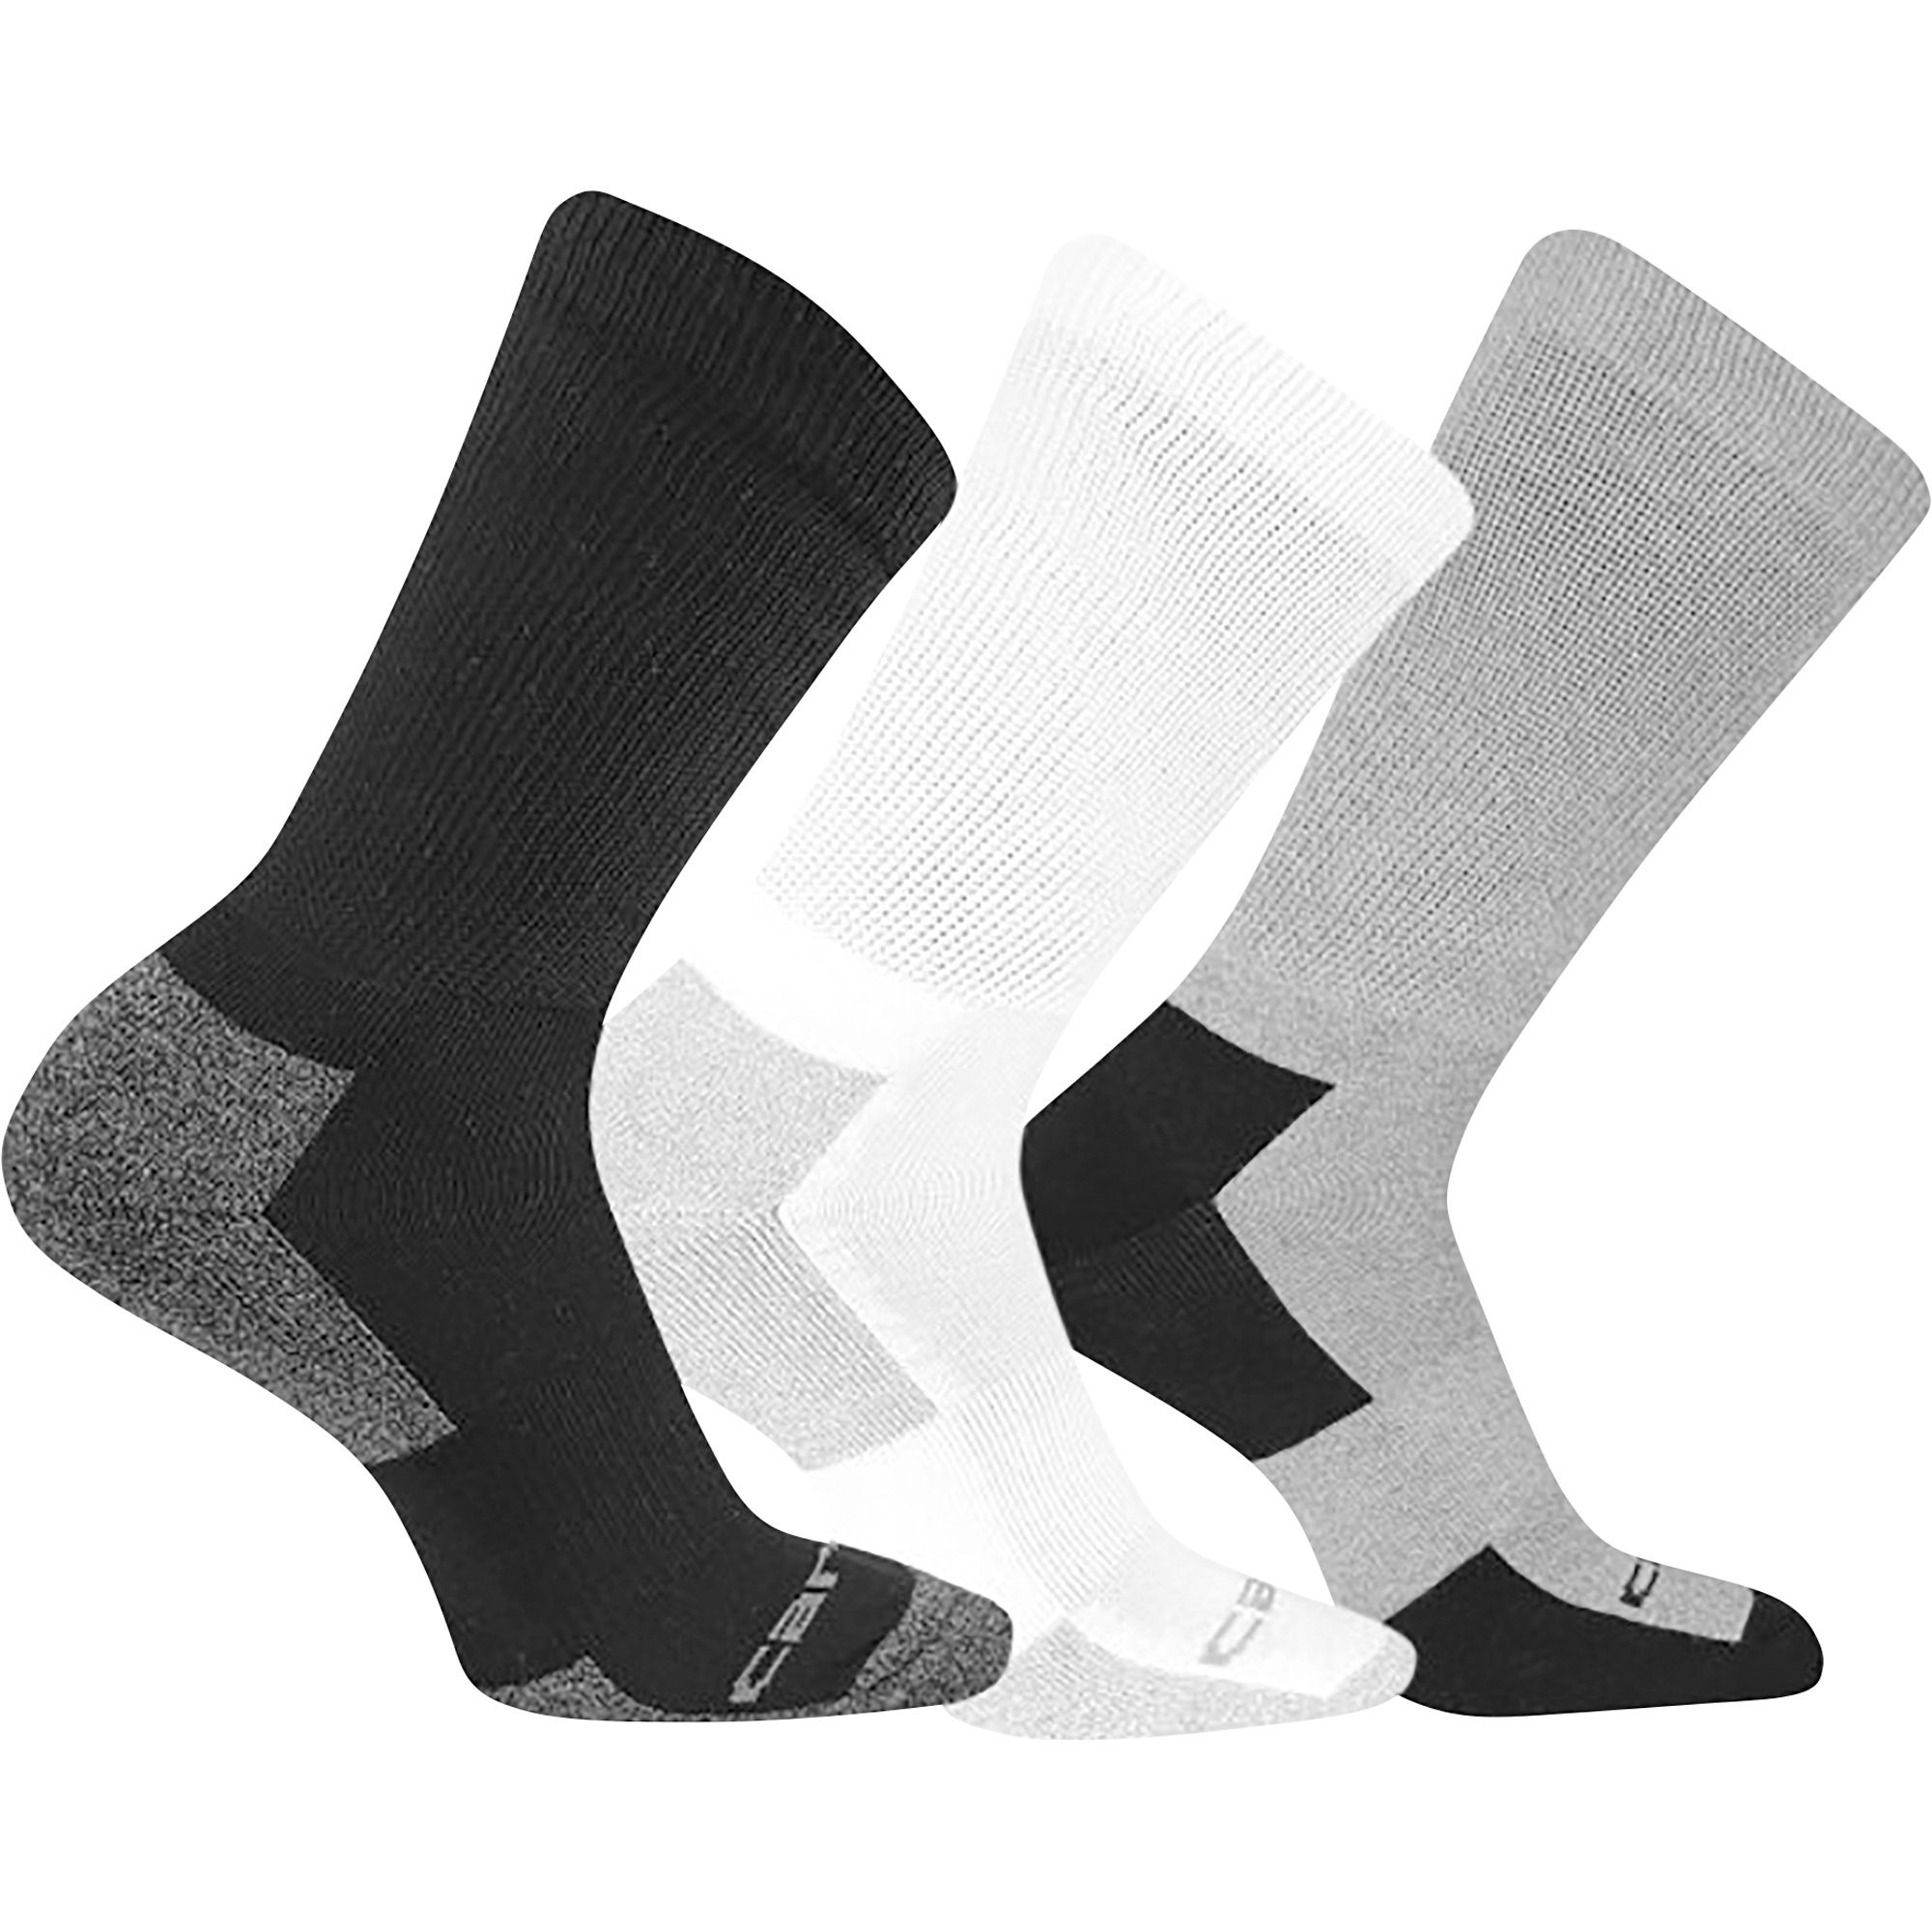 3-Pairs Carhartt Men’s Premium Comfort Stretch Crew Socks (Size XL) $10 or 3 for $25 ($8.33 each) + Free Shipping